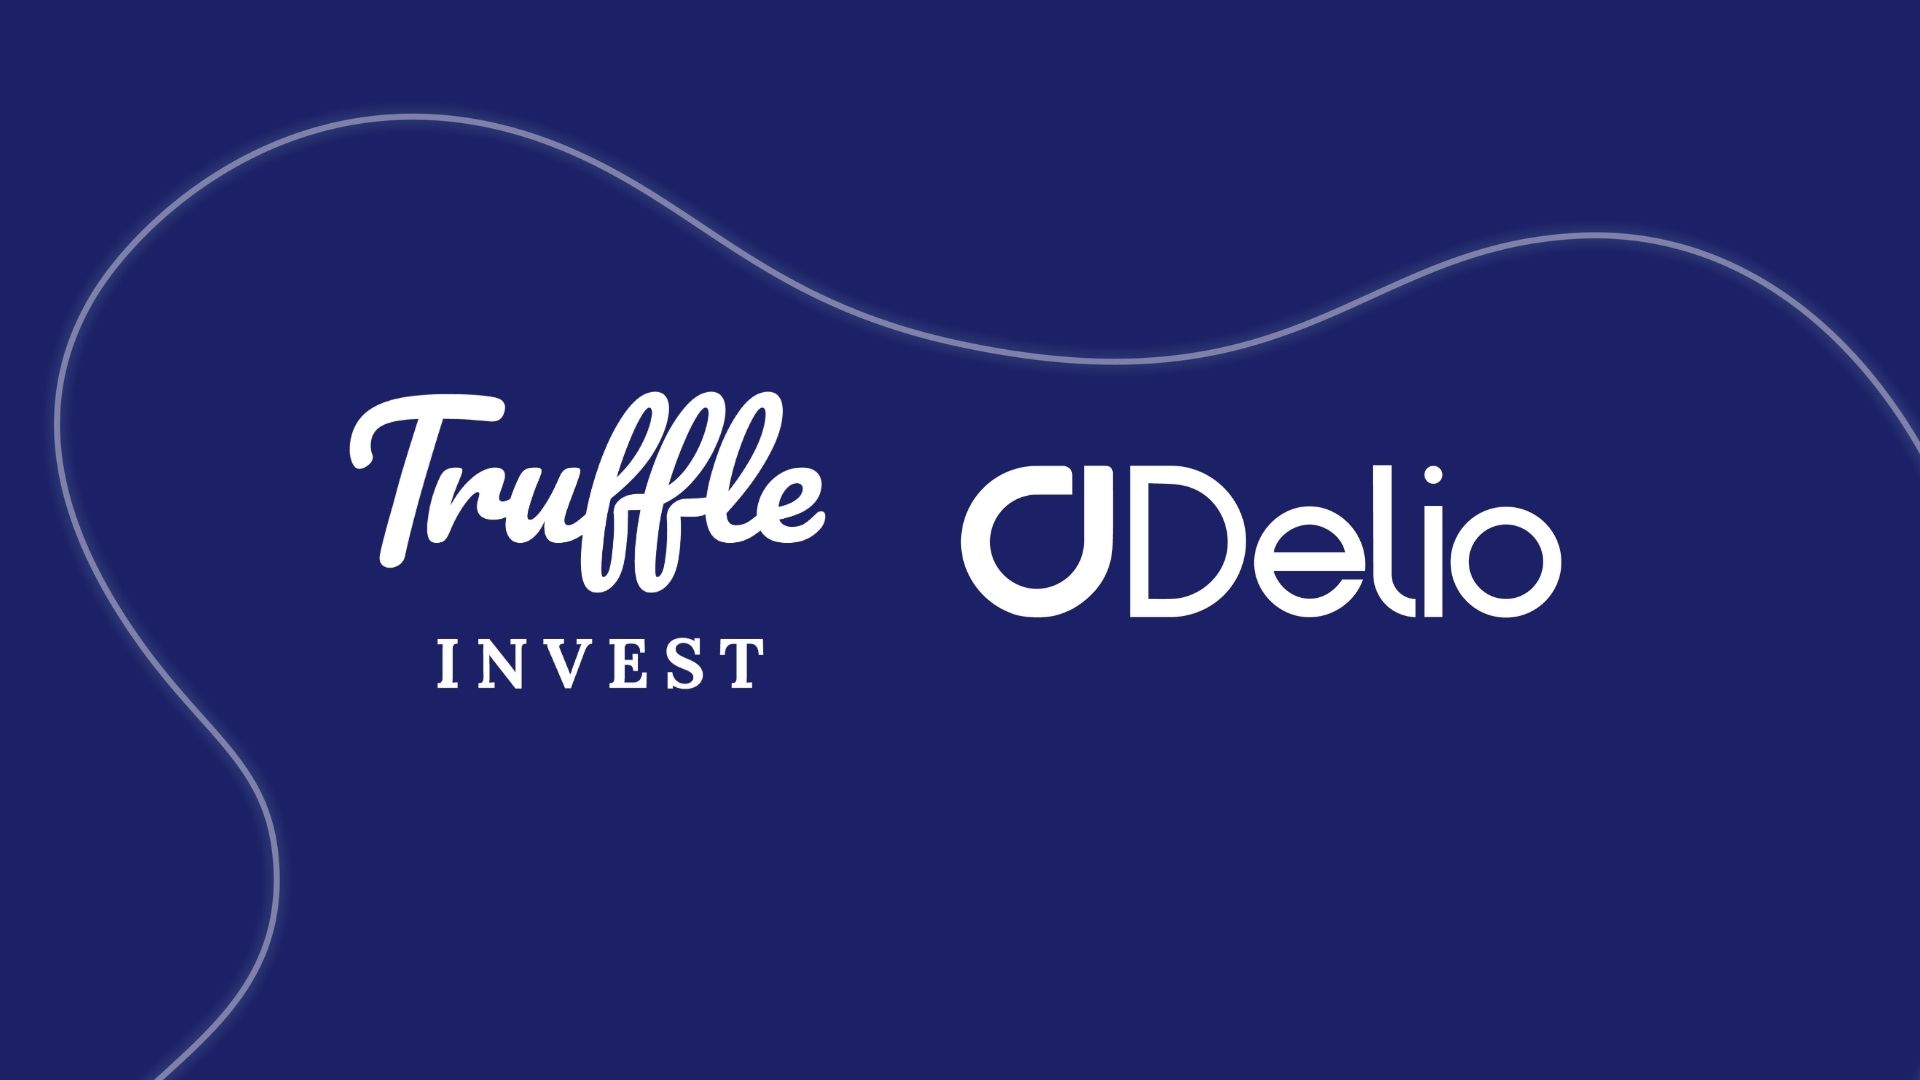 Truffle Invest and Delio to offer modular access to private markets funds